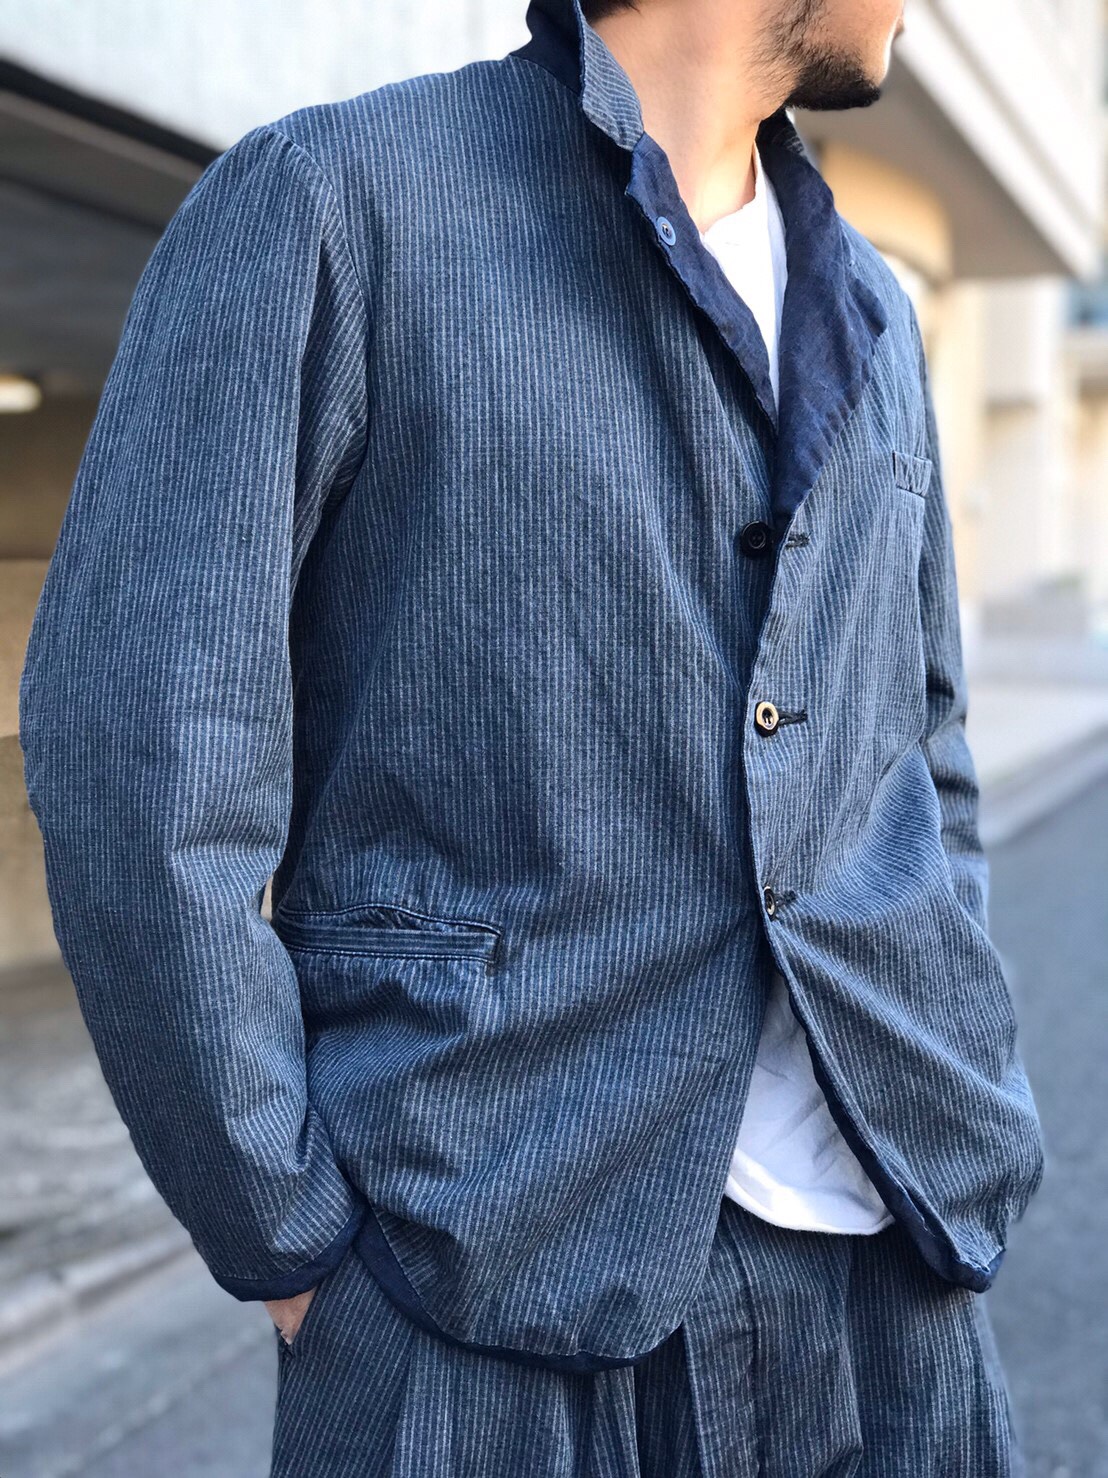 OUTIL 20SS JUST ARRIVAL | ARCH TOKYO